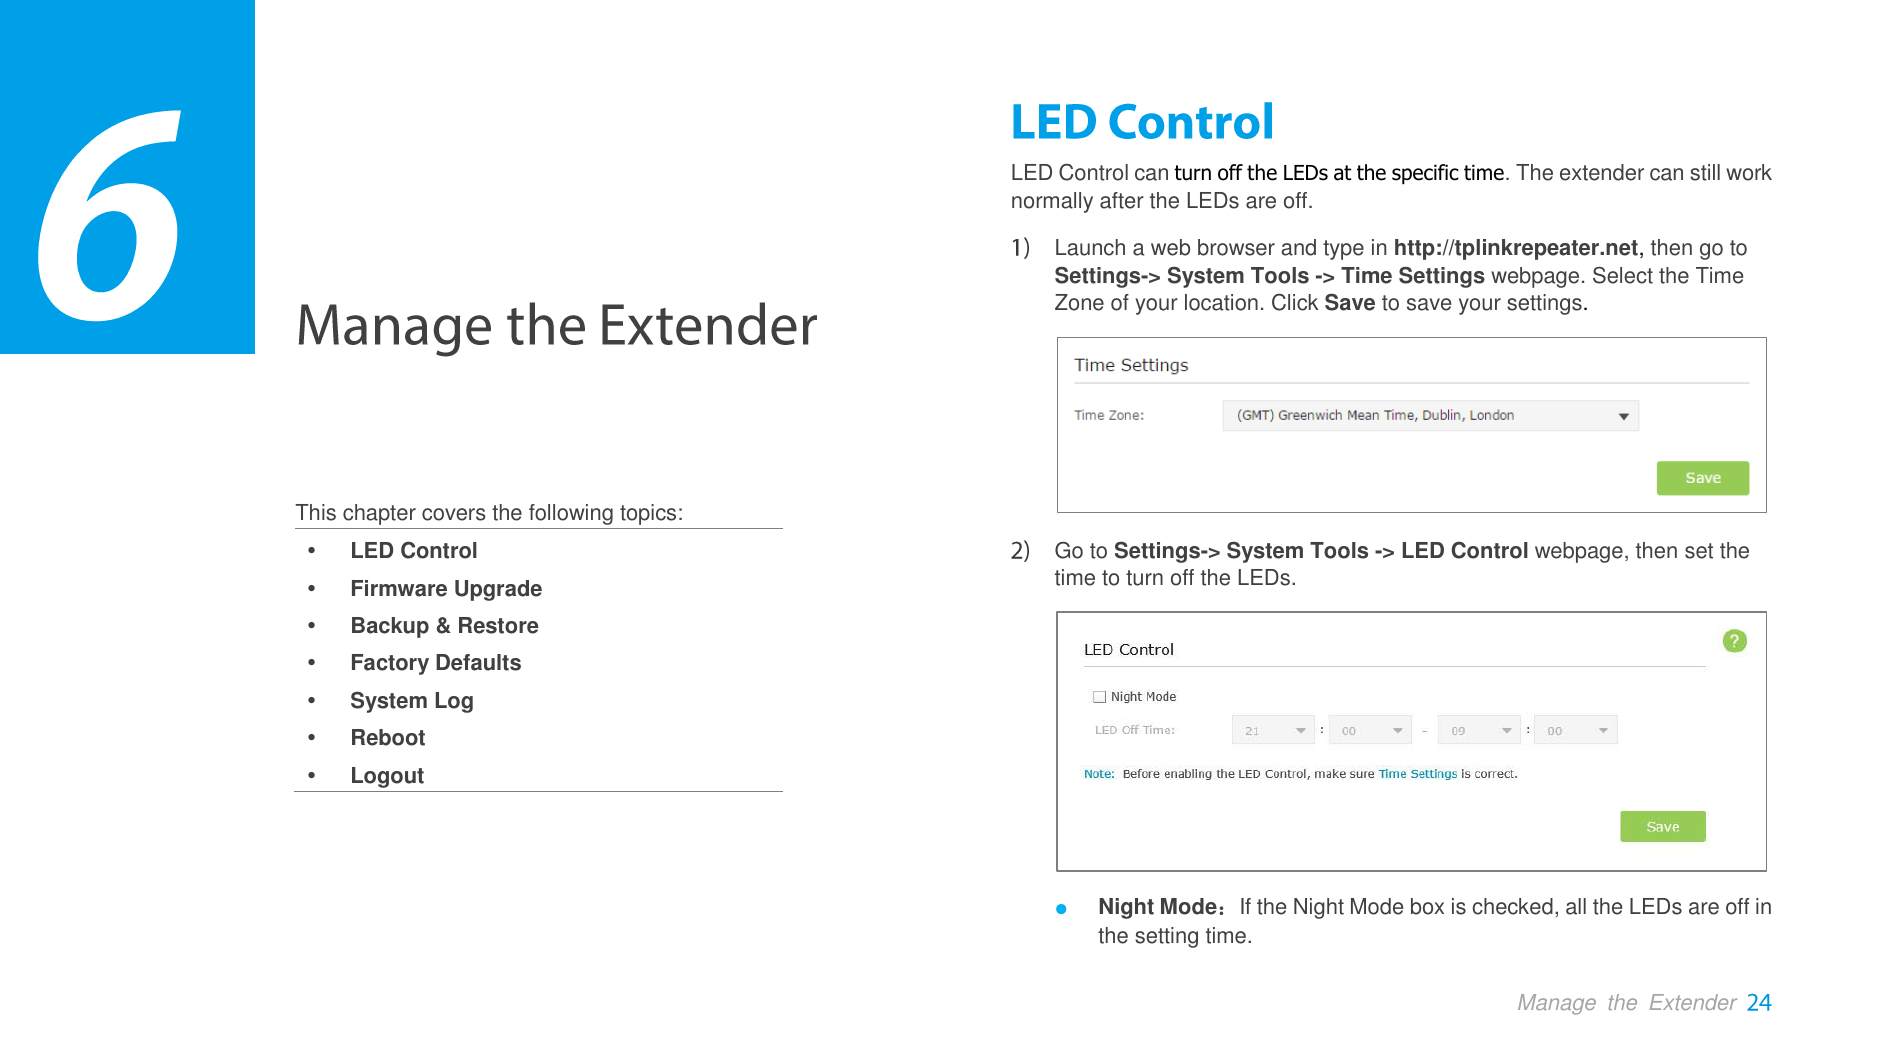  Manage  the  Extender     This chapter covers the following topics:  LED Control  Firmware Upgrade  Backup &amp; Restore  Factory Defaults  System Log  Reboot  Logout LED Control can turn off the LEDs at the specific time. The extender can still work normally after the LEDs are off.    Launch a web browser and type in http://tplinkrepeater.net, then go to Settings-&gt; System Tools -&gt; Time Settings webpage. Select the Time Zone of your location. Click Save to save your settings.   Go to Settings-&gt; System Tools -&gt; LED Control webpage, then set the time to turn off the LEDs.  ● Night Mode：If the Night Mode box is checked, all the LEDs are off in the setting time. 3 